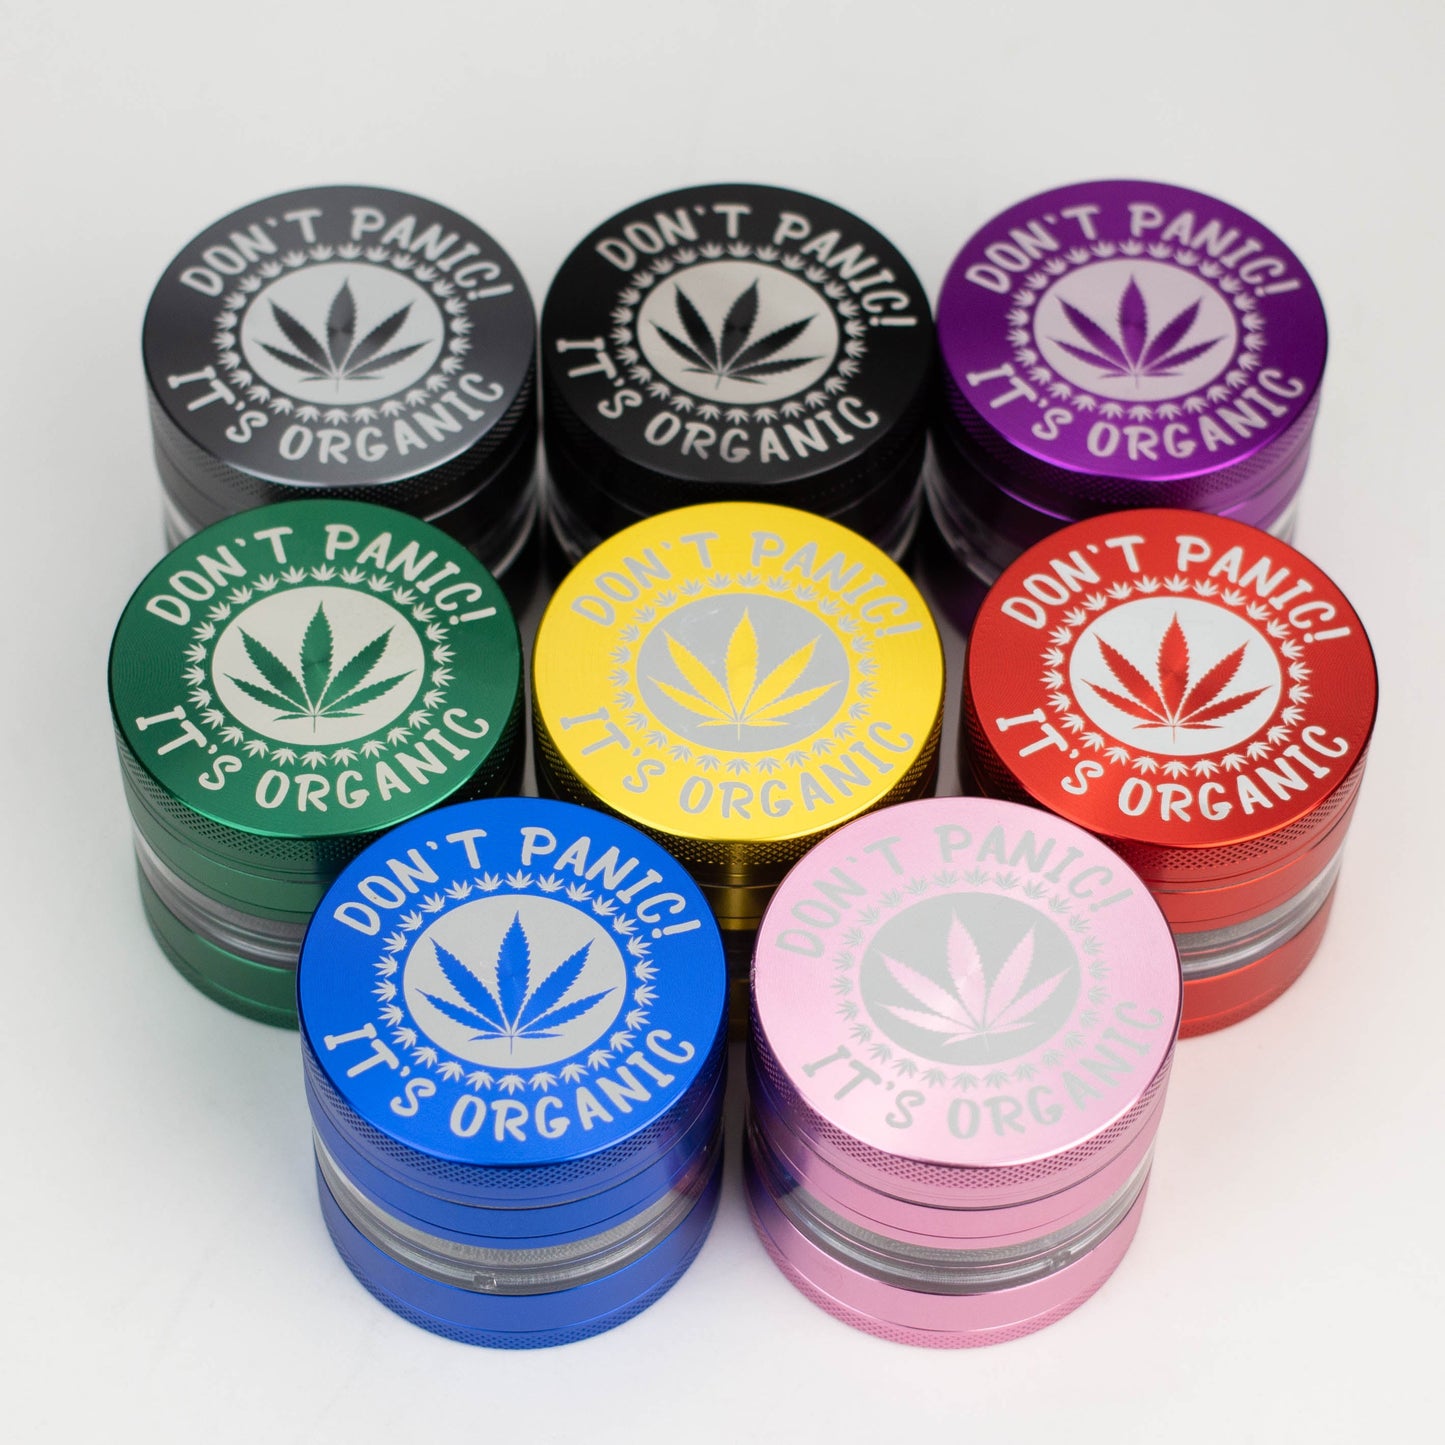 Heavy Duty Large "Don't Panic It's Organic" 4 Parts Weed Grinder Engraved in Canada_1